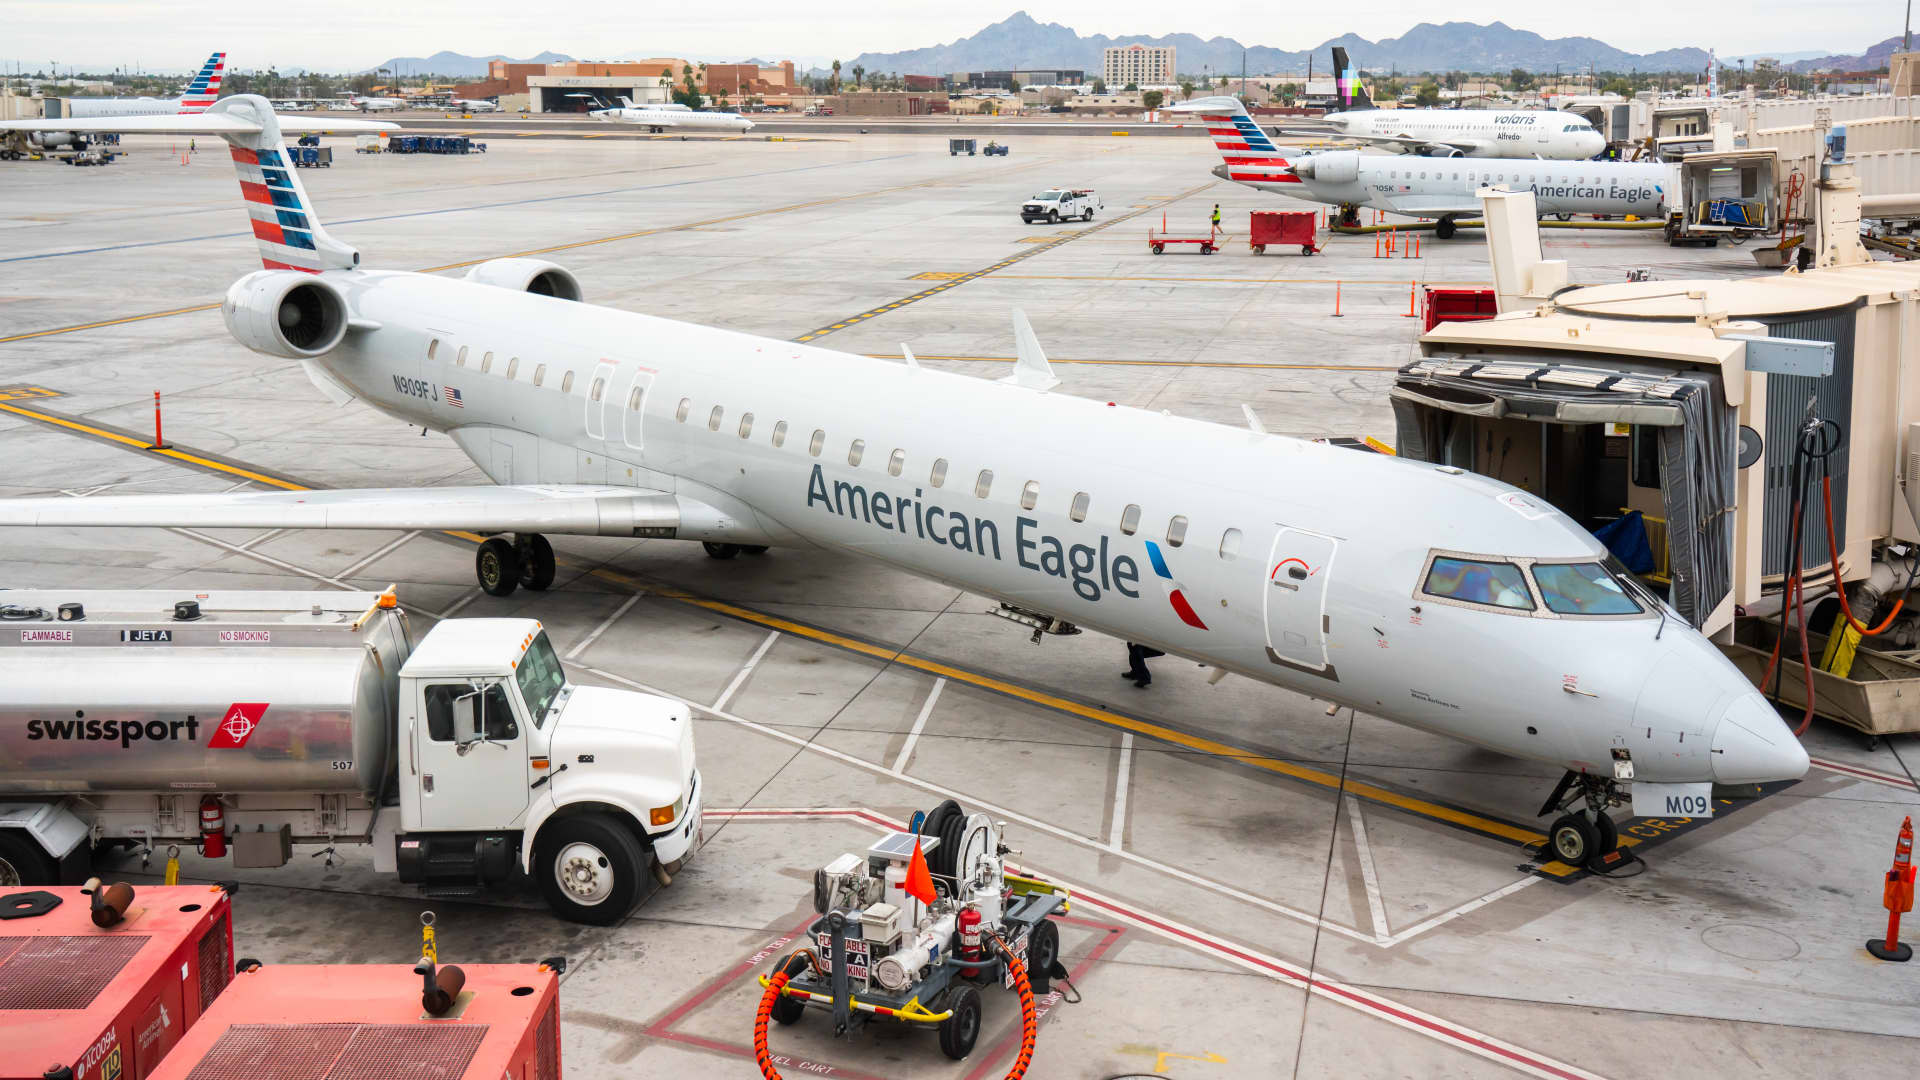 American Airlines is dropping Mesa, citing financial problems